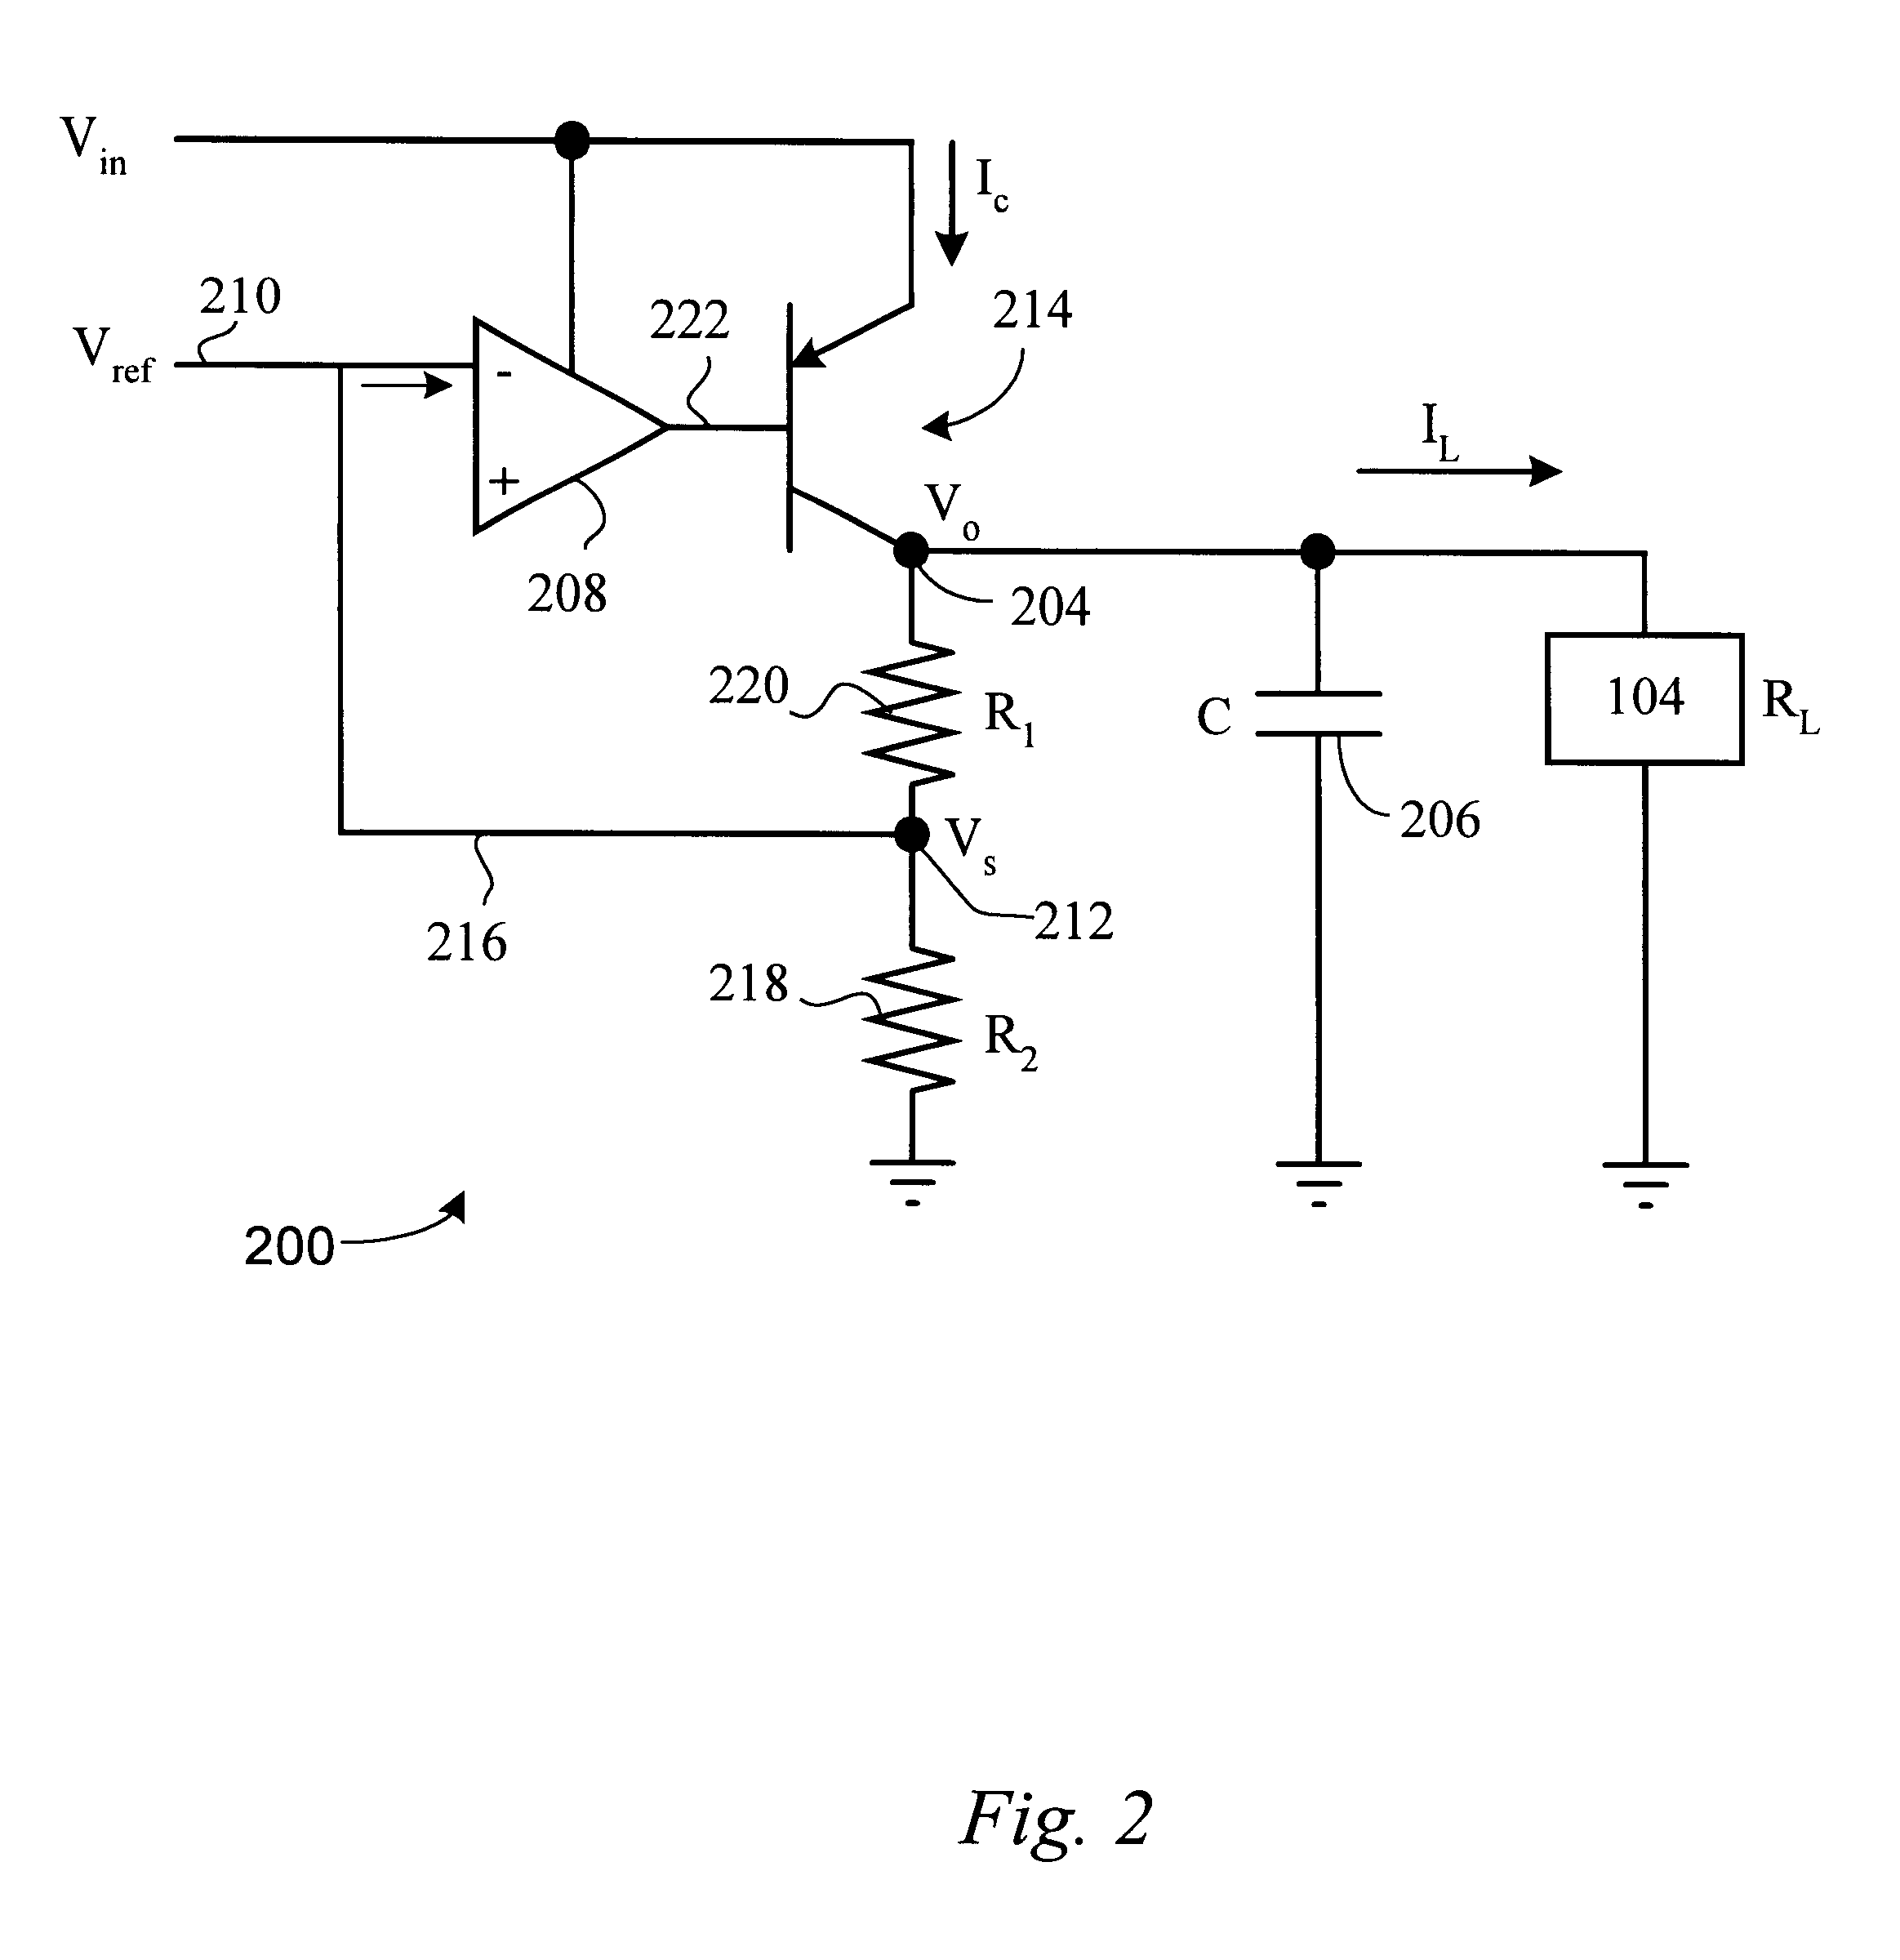 Low drop-out regulator capable of functioning in linear and saturated regions of output driver